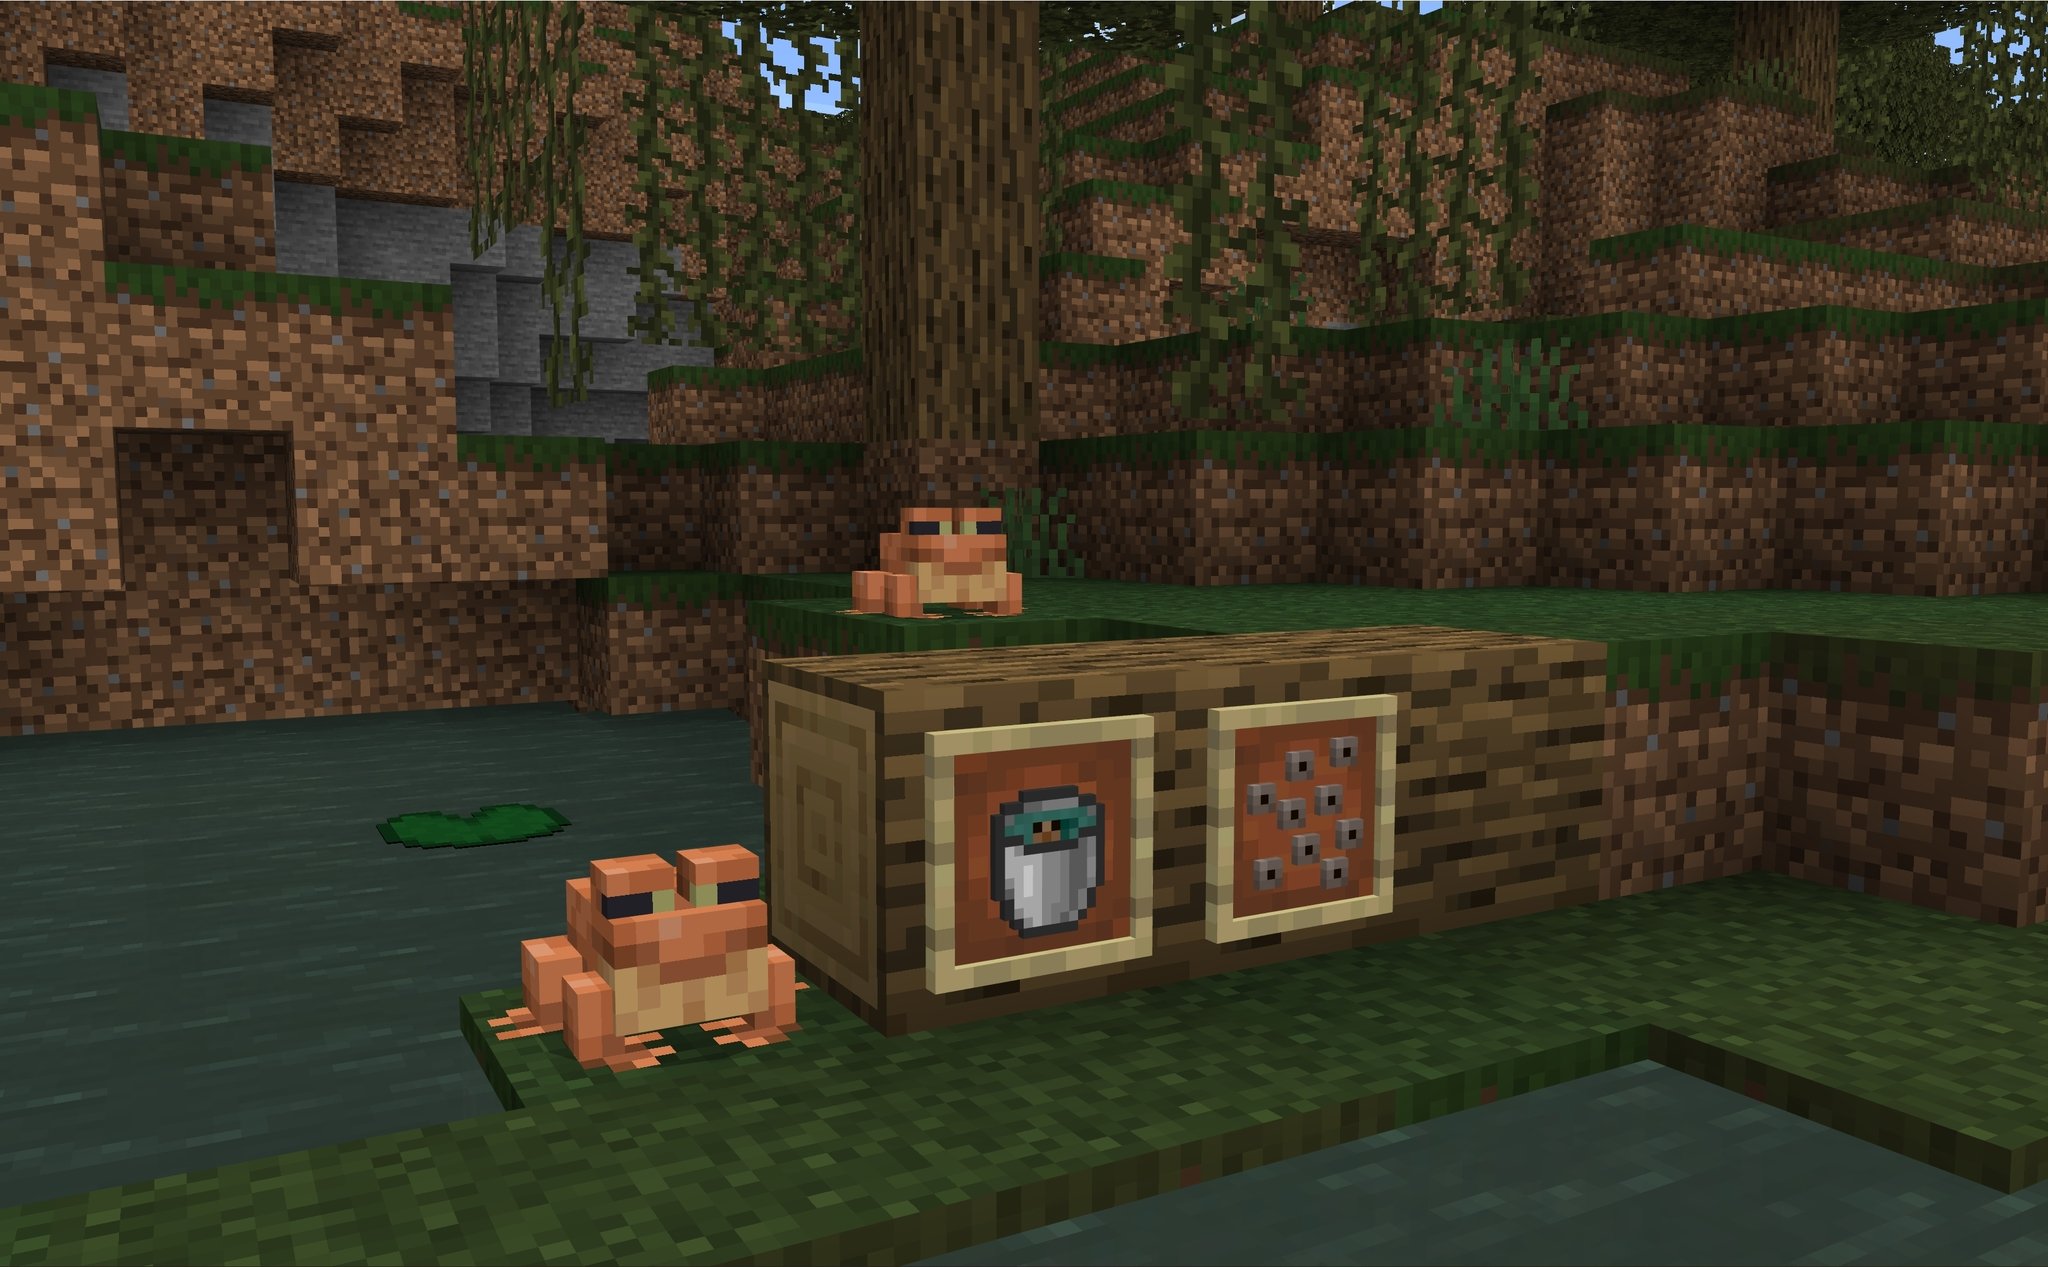 New Minecraft Beta Introduces Blocks Made By Frogs - GameSpot